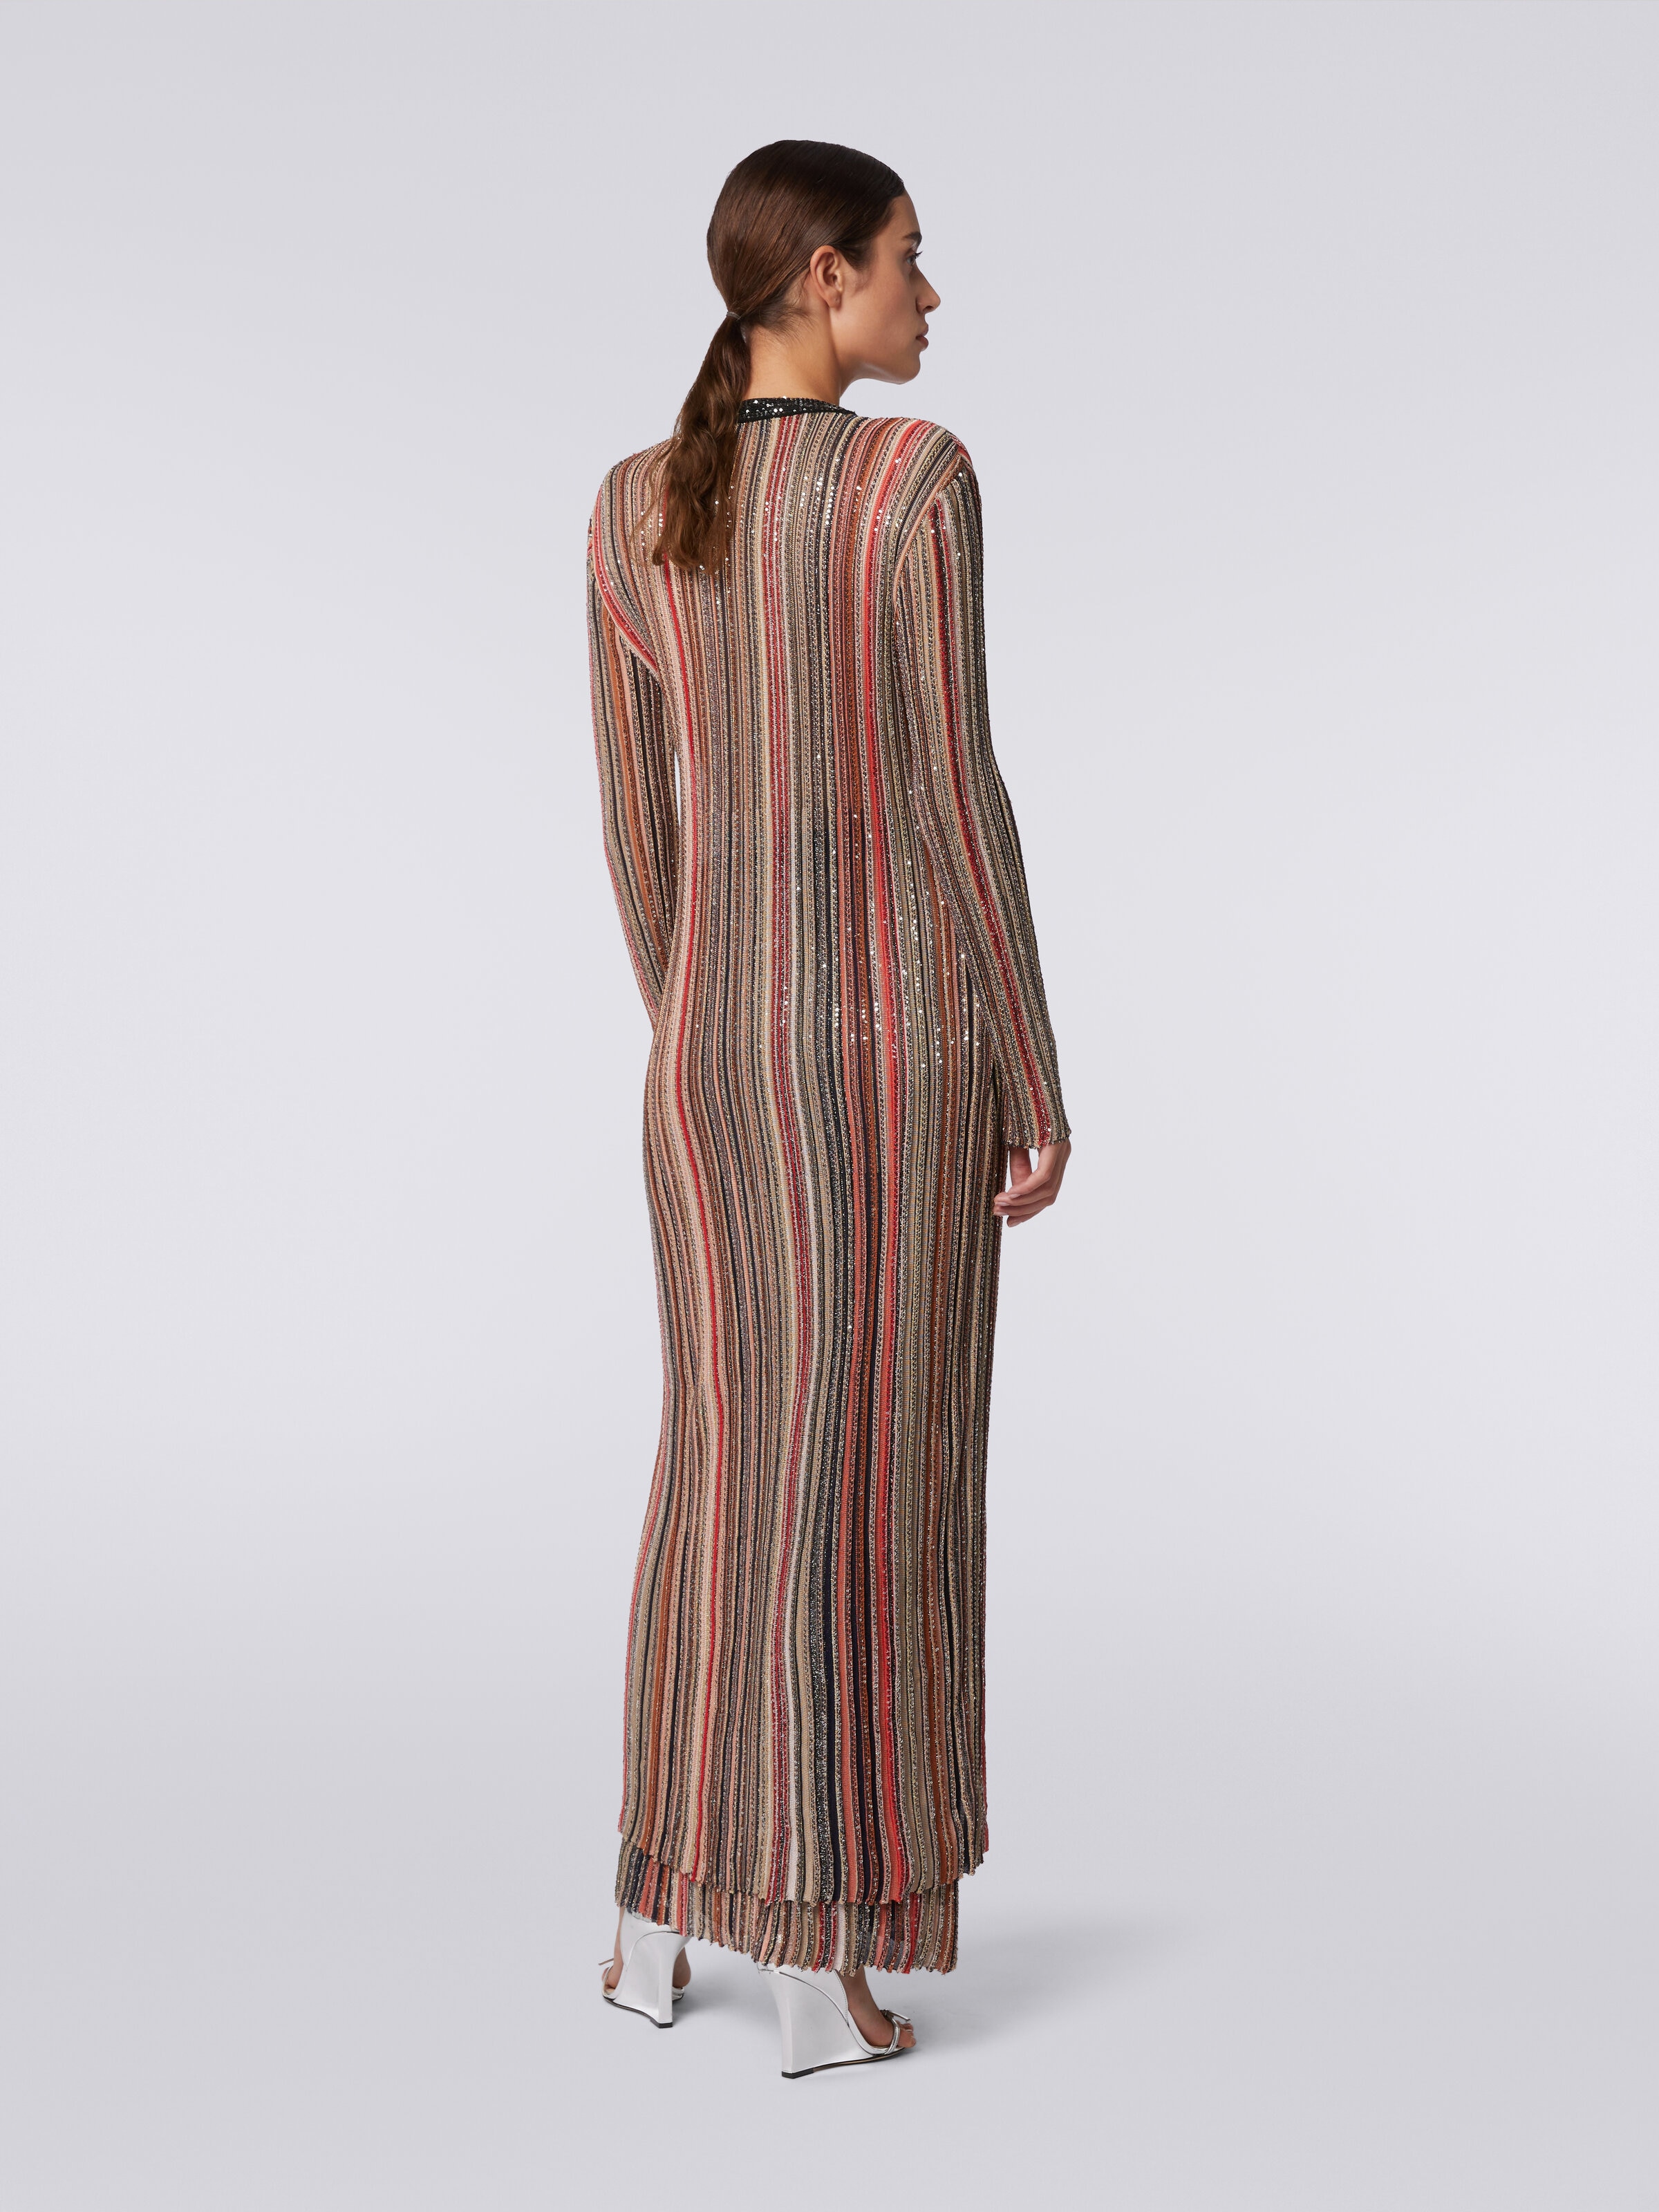 Long cardigan in vertical striped knit with sequins, Multicoloured  - 3